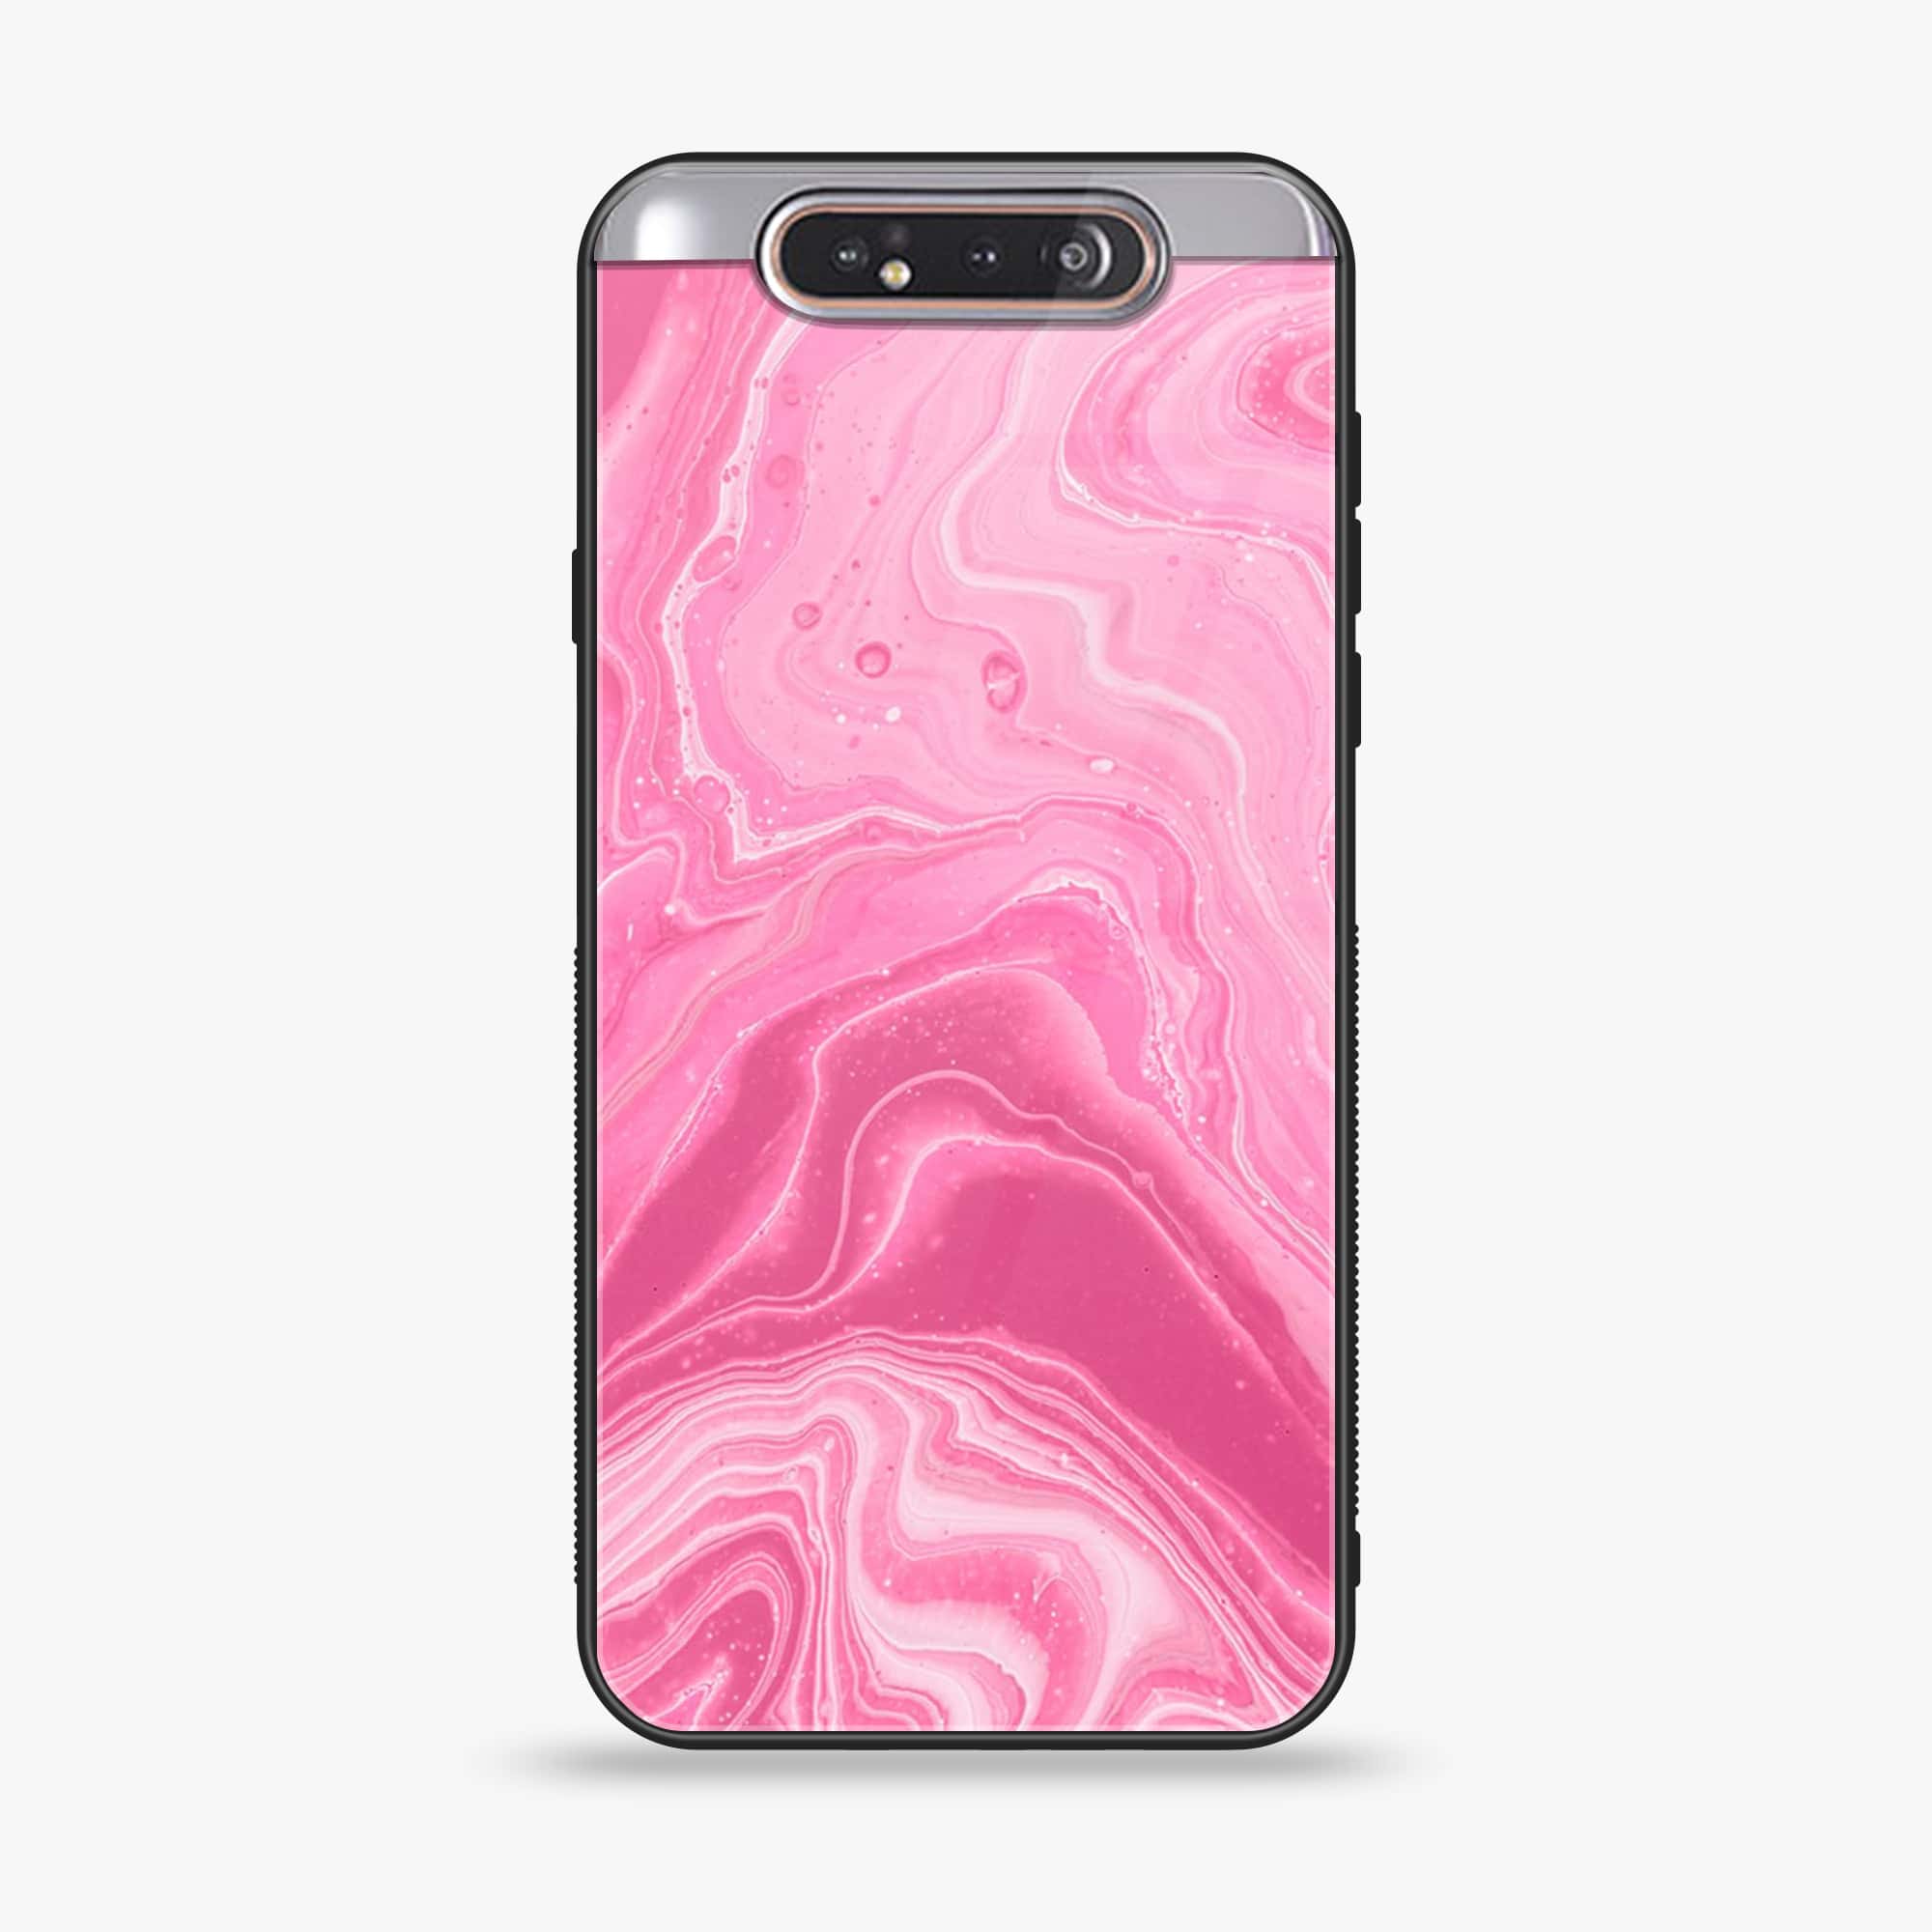 Samsung Galaxy A80 - Pink Marble Series - Premium Printed Glass soft Bumper shock Proof Case